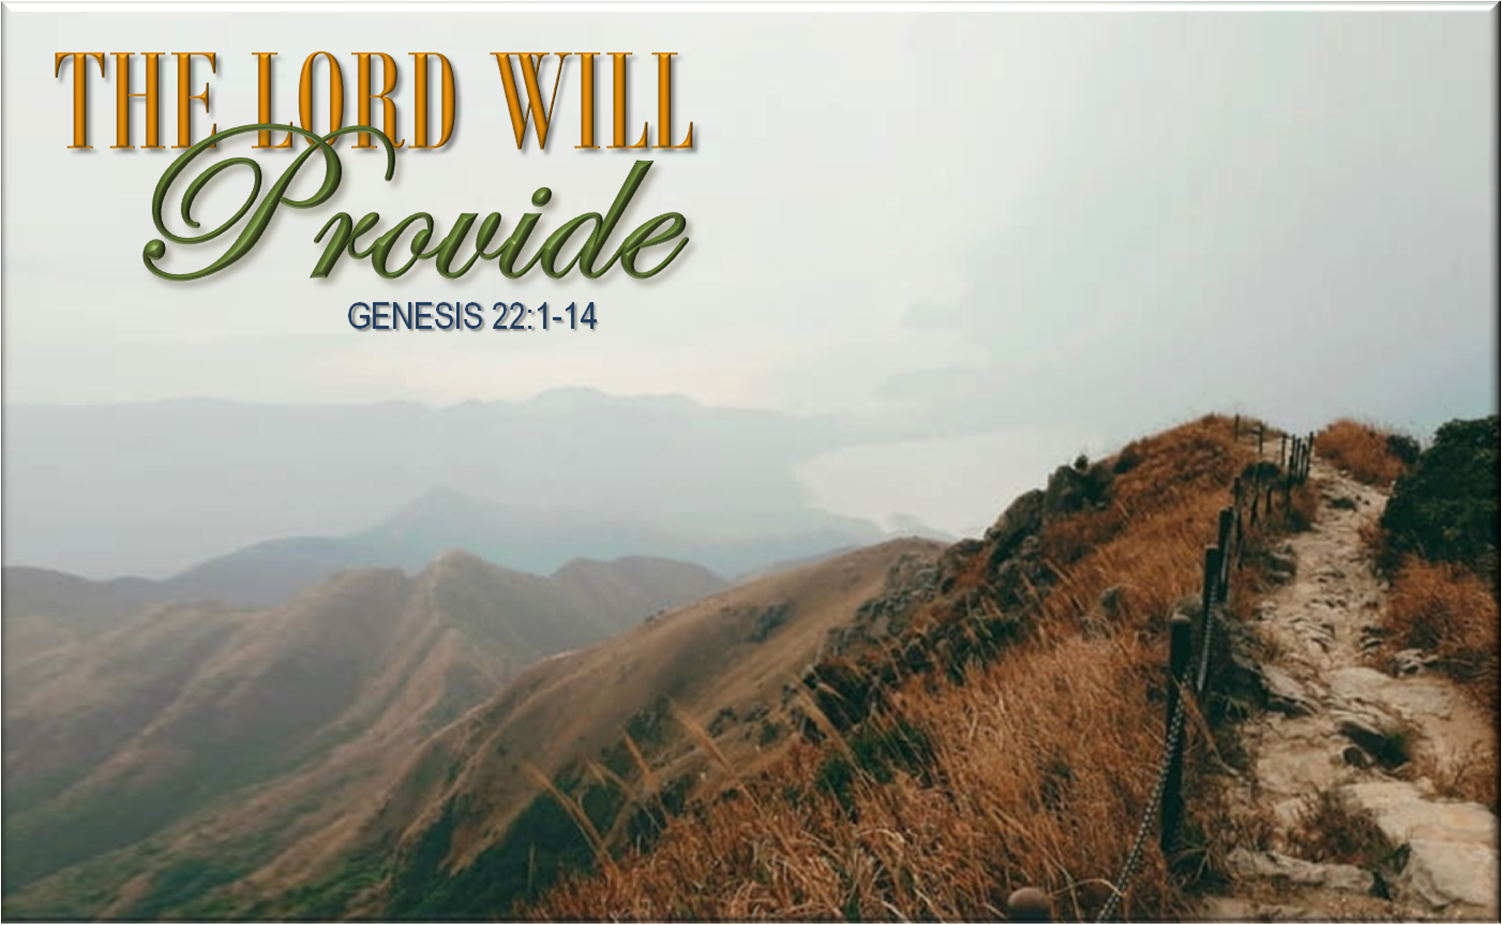 "The Lord Will Provide"